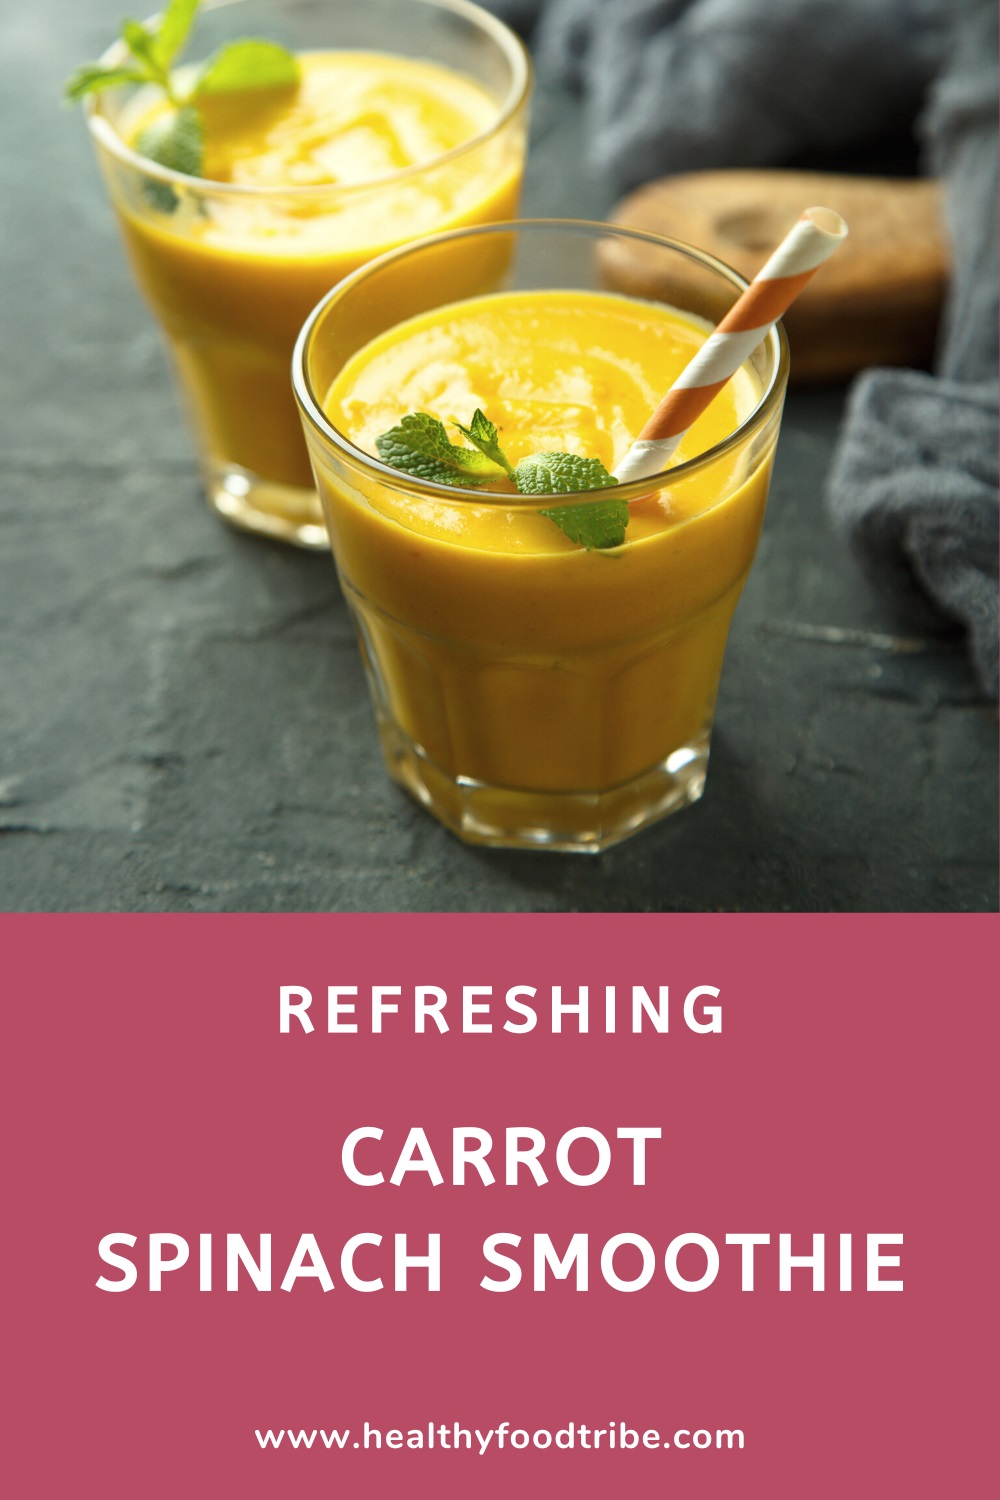 Carrot and spinach smoothie (with apple and ginger)